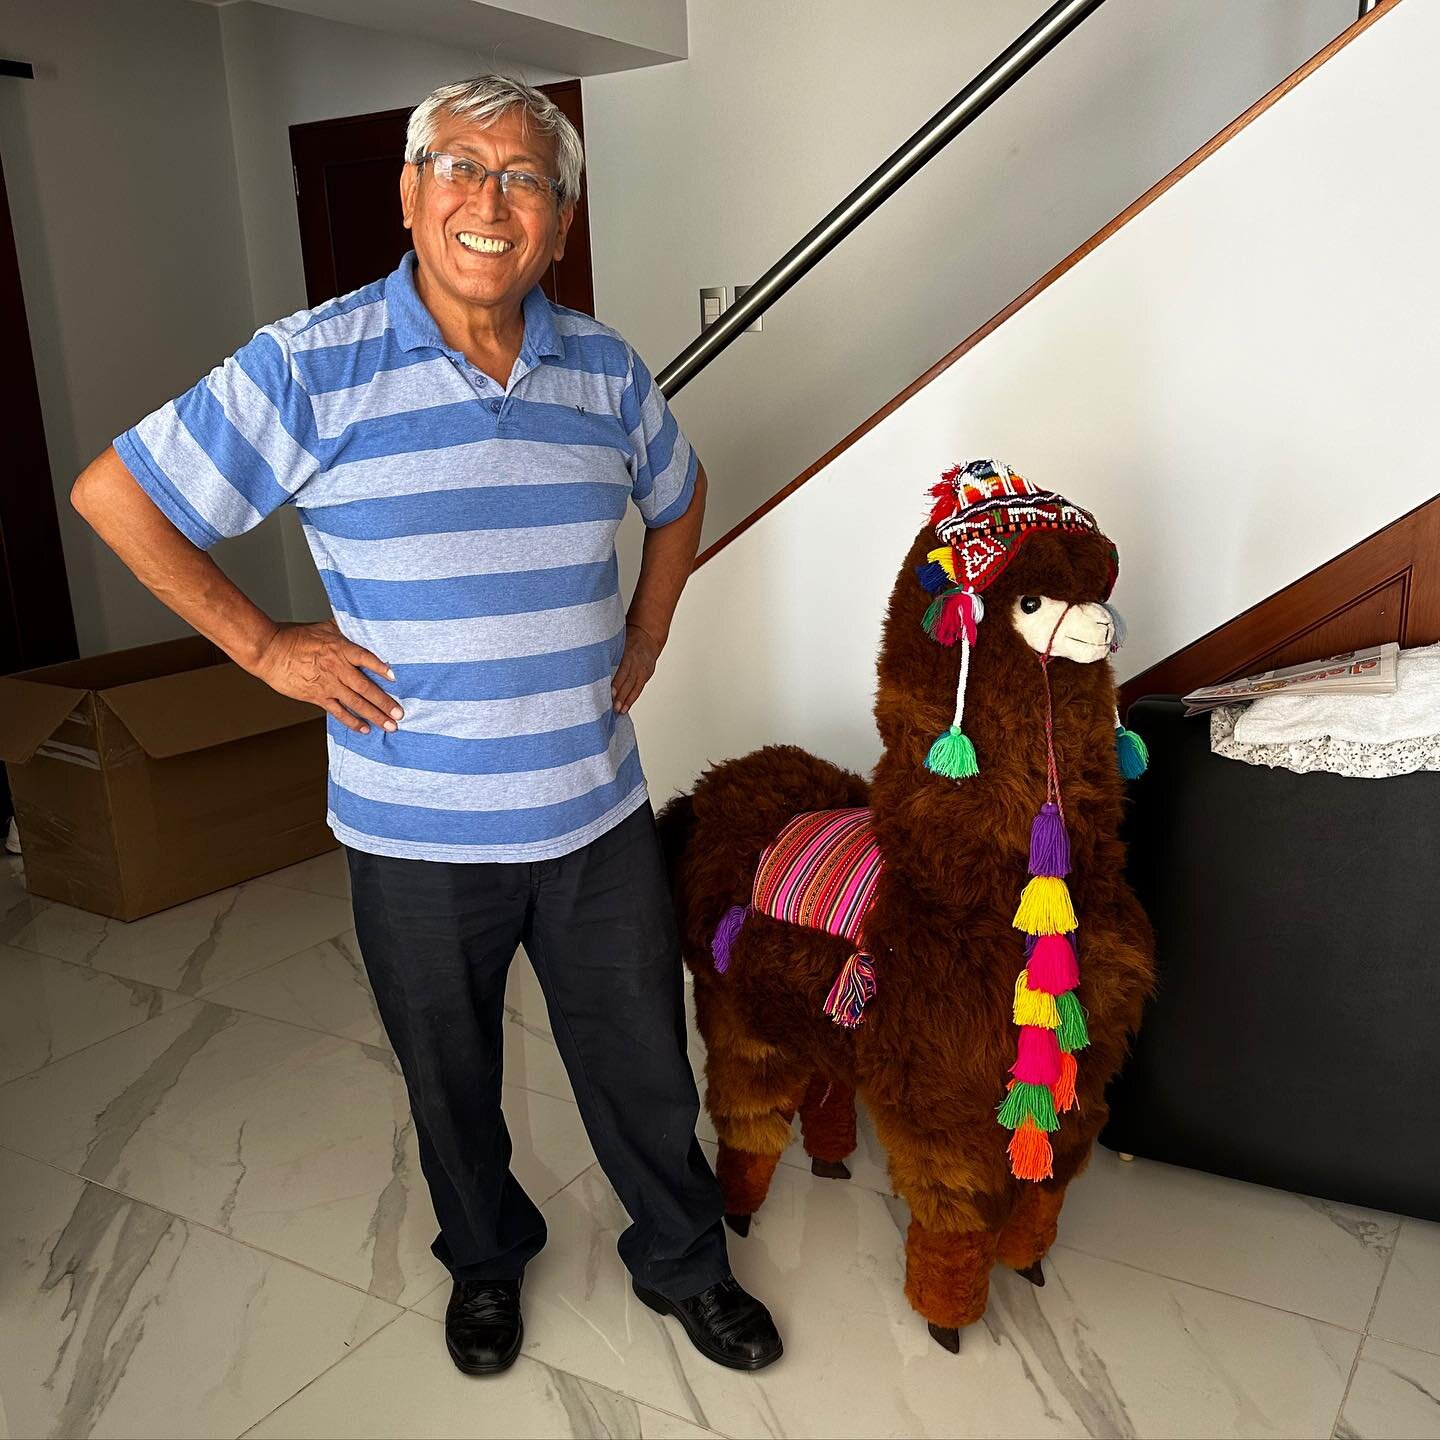 We are so excited Don Alberto is back to the states! He and Dona Elaine have been in Lima and have brought back a special new family member! Please welcome Miss Dolly Llama to our Fiesta Westside Family!